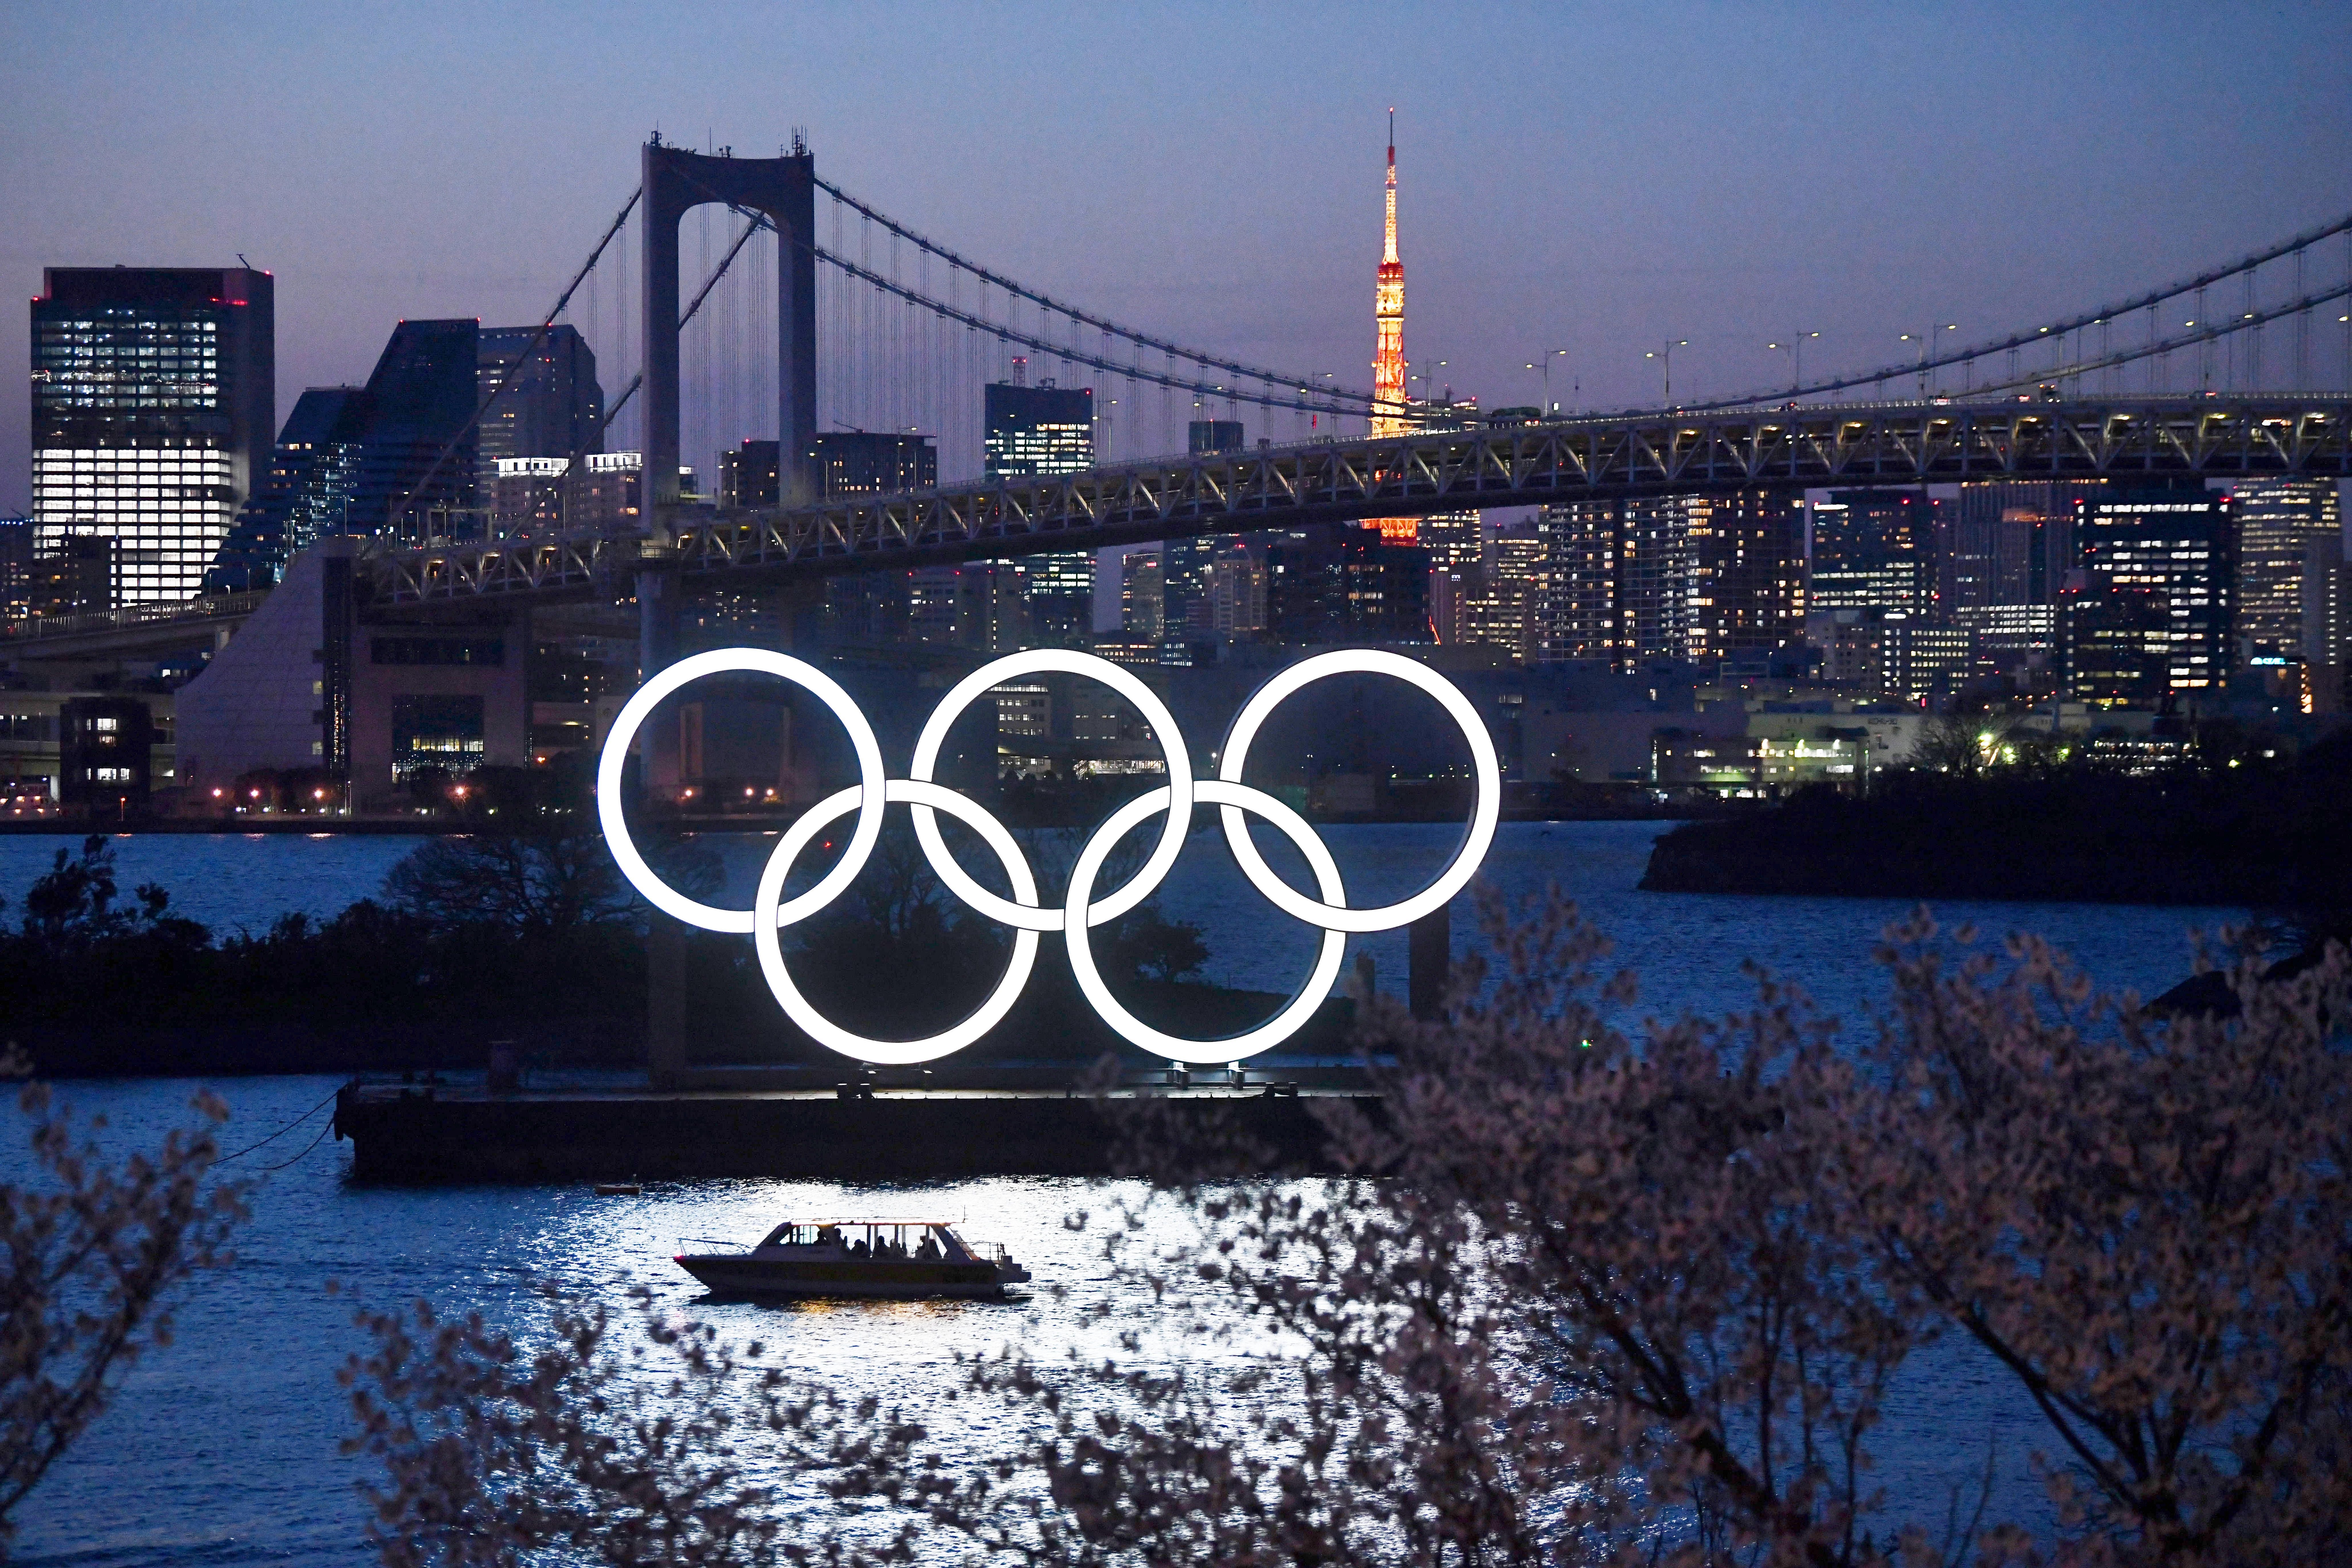 A boat sails past the Olympic rings in Tokyo on March 25. Photo: TNS